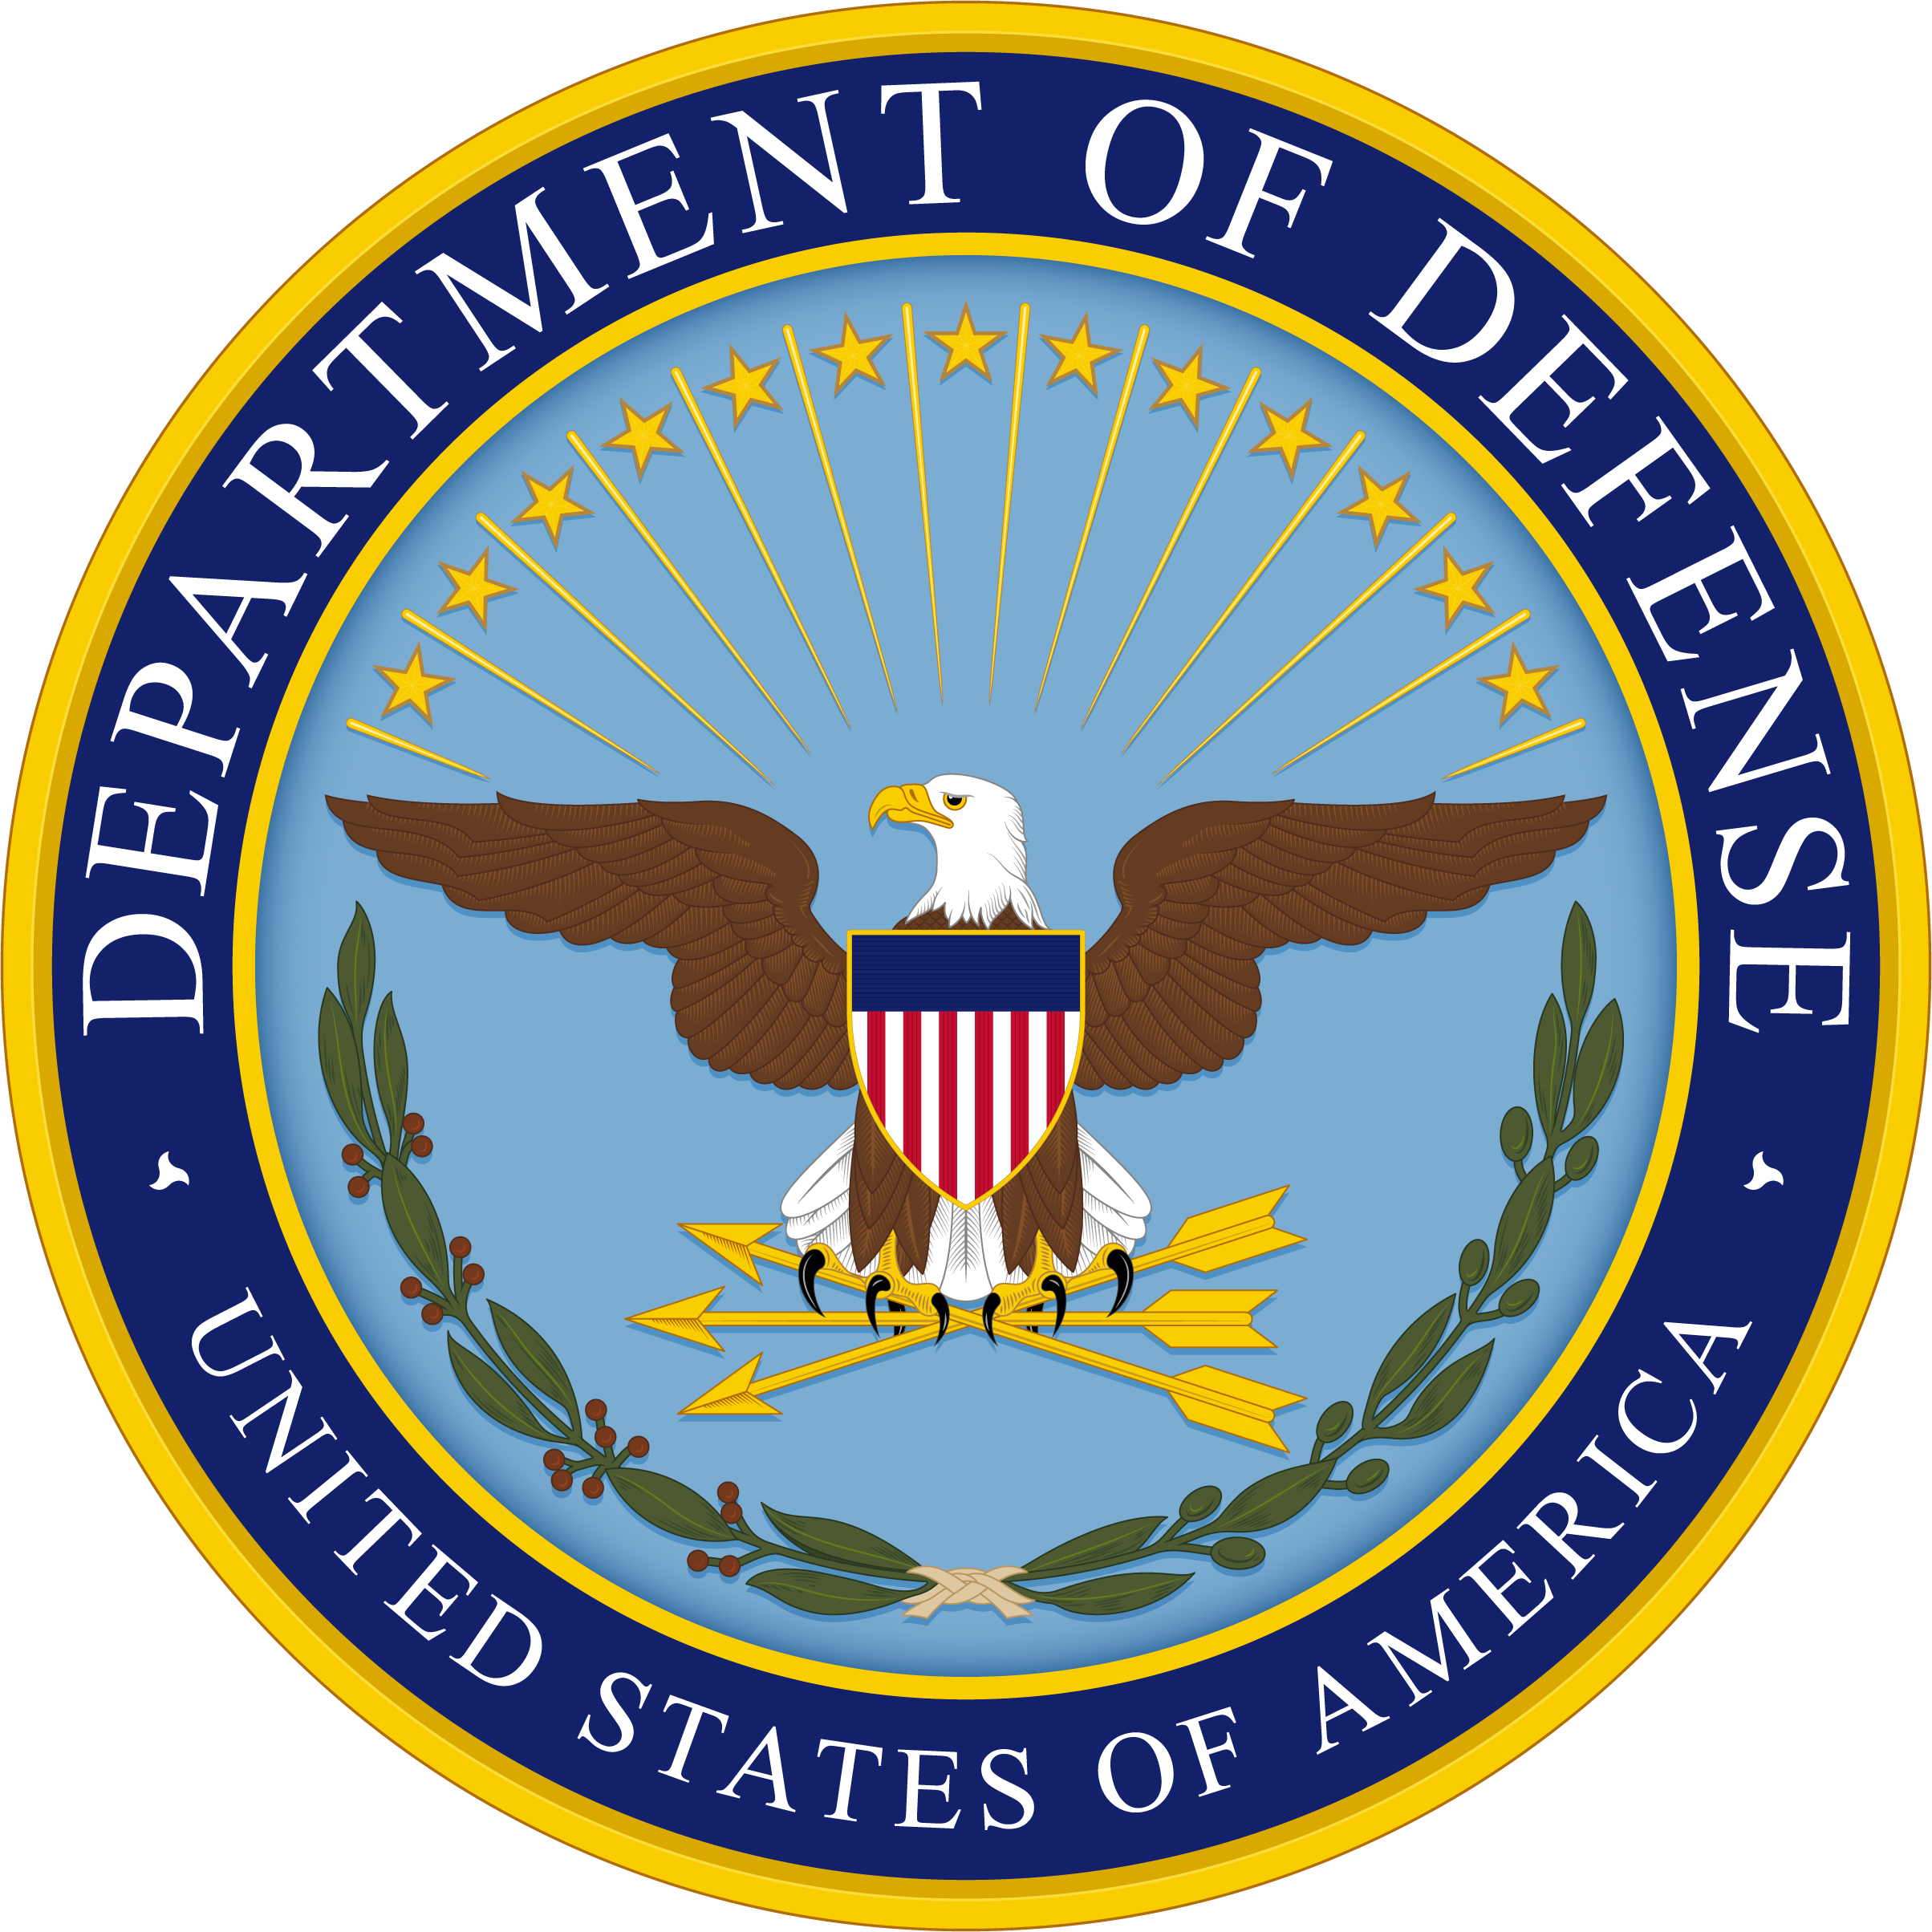 The official Seal for the Department of Defense